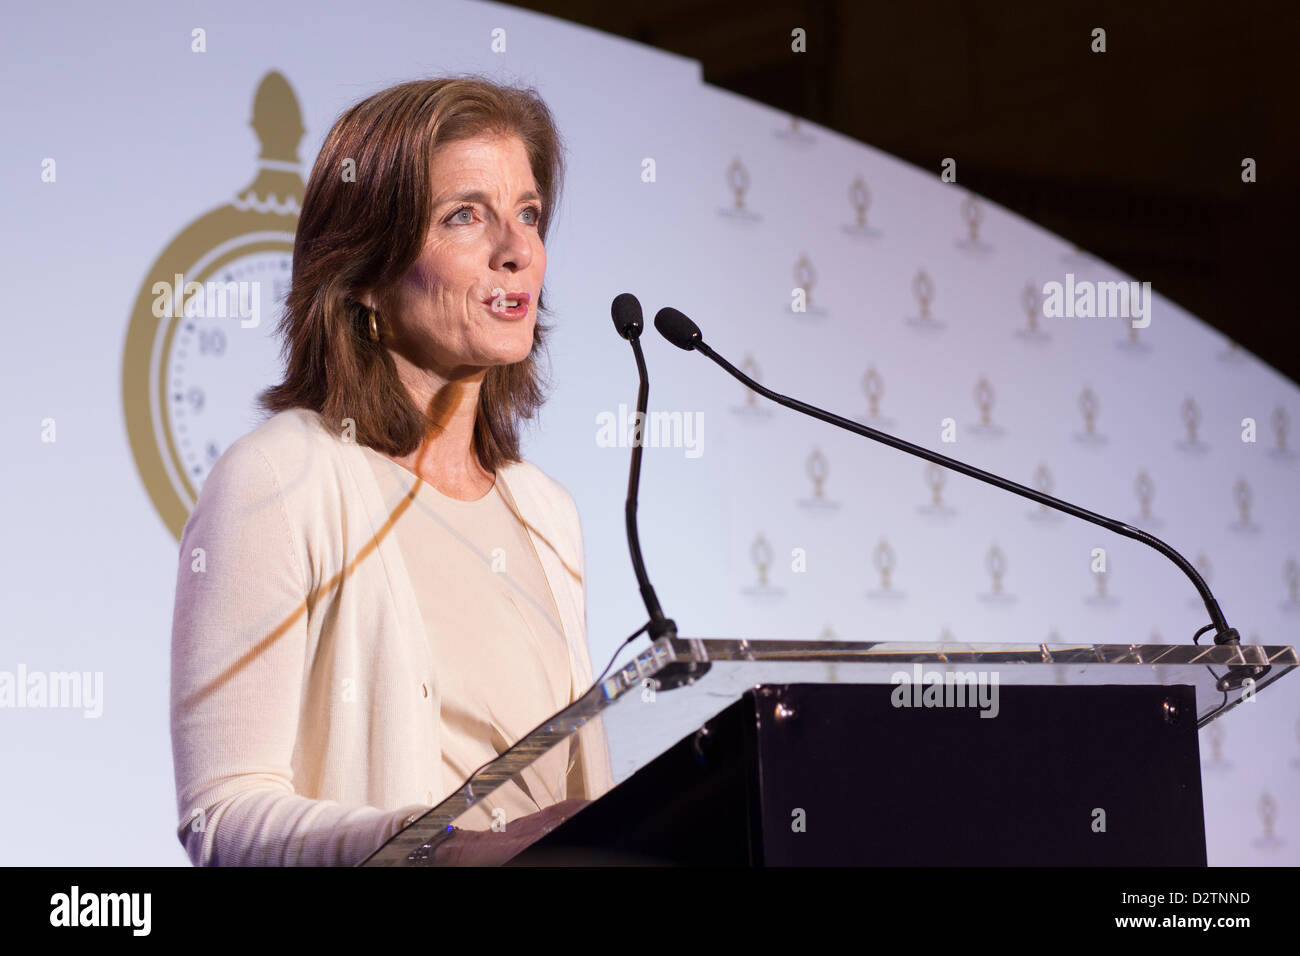 New York City, USA, 1 February 2013. Caroline Kennedy speaking of the restoration of the Terminal at the centennial celebration of Grand Central Terminal. Kennedy's mother, Jacqueline Kennedy Onassis, was instrumental in the historic preservation of Grand Central. Stock Photo